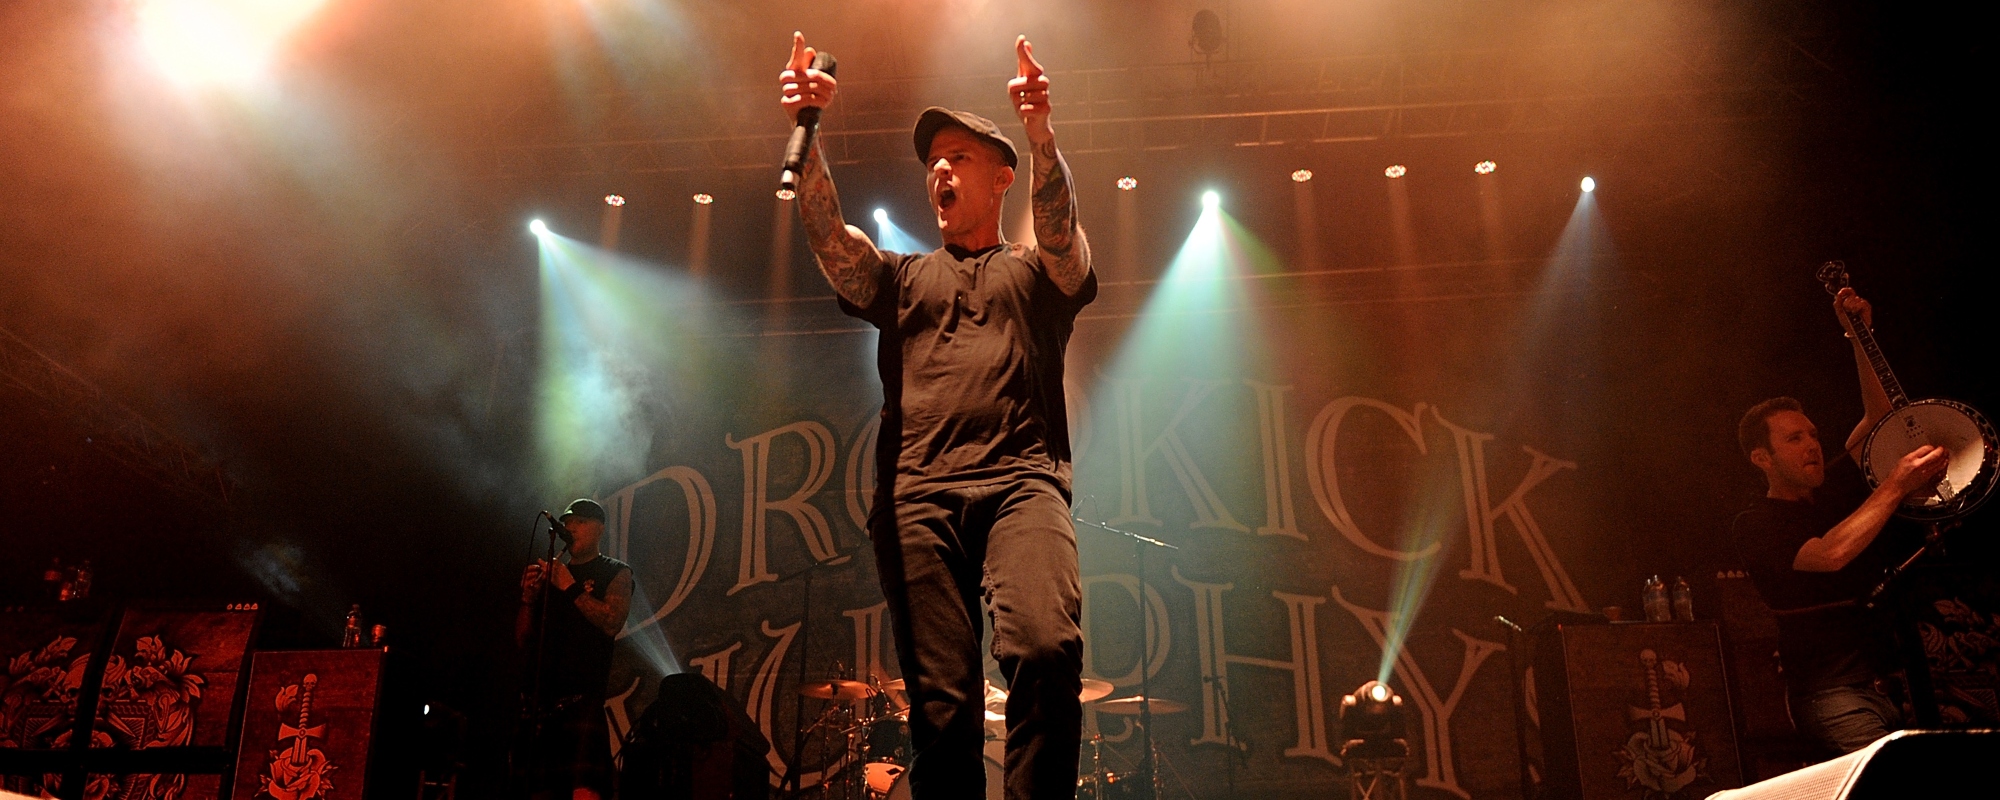 Dropkick Murphys Announce St. Patrick’s Day Concert Livestream from Boston: How to Watch